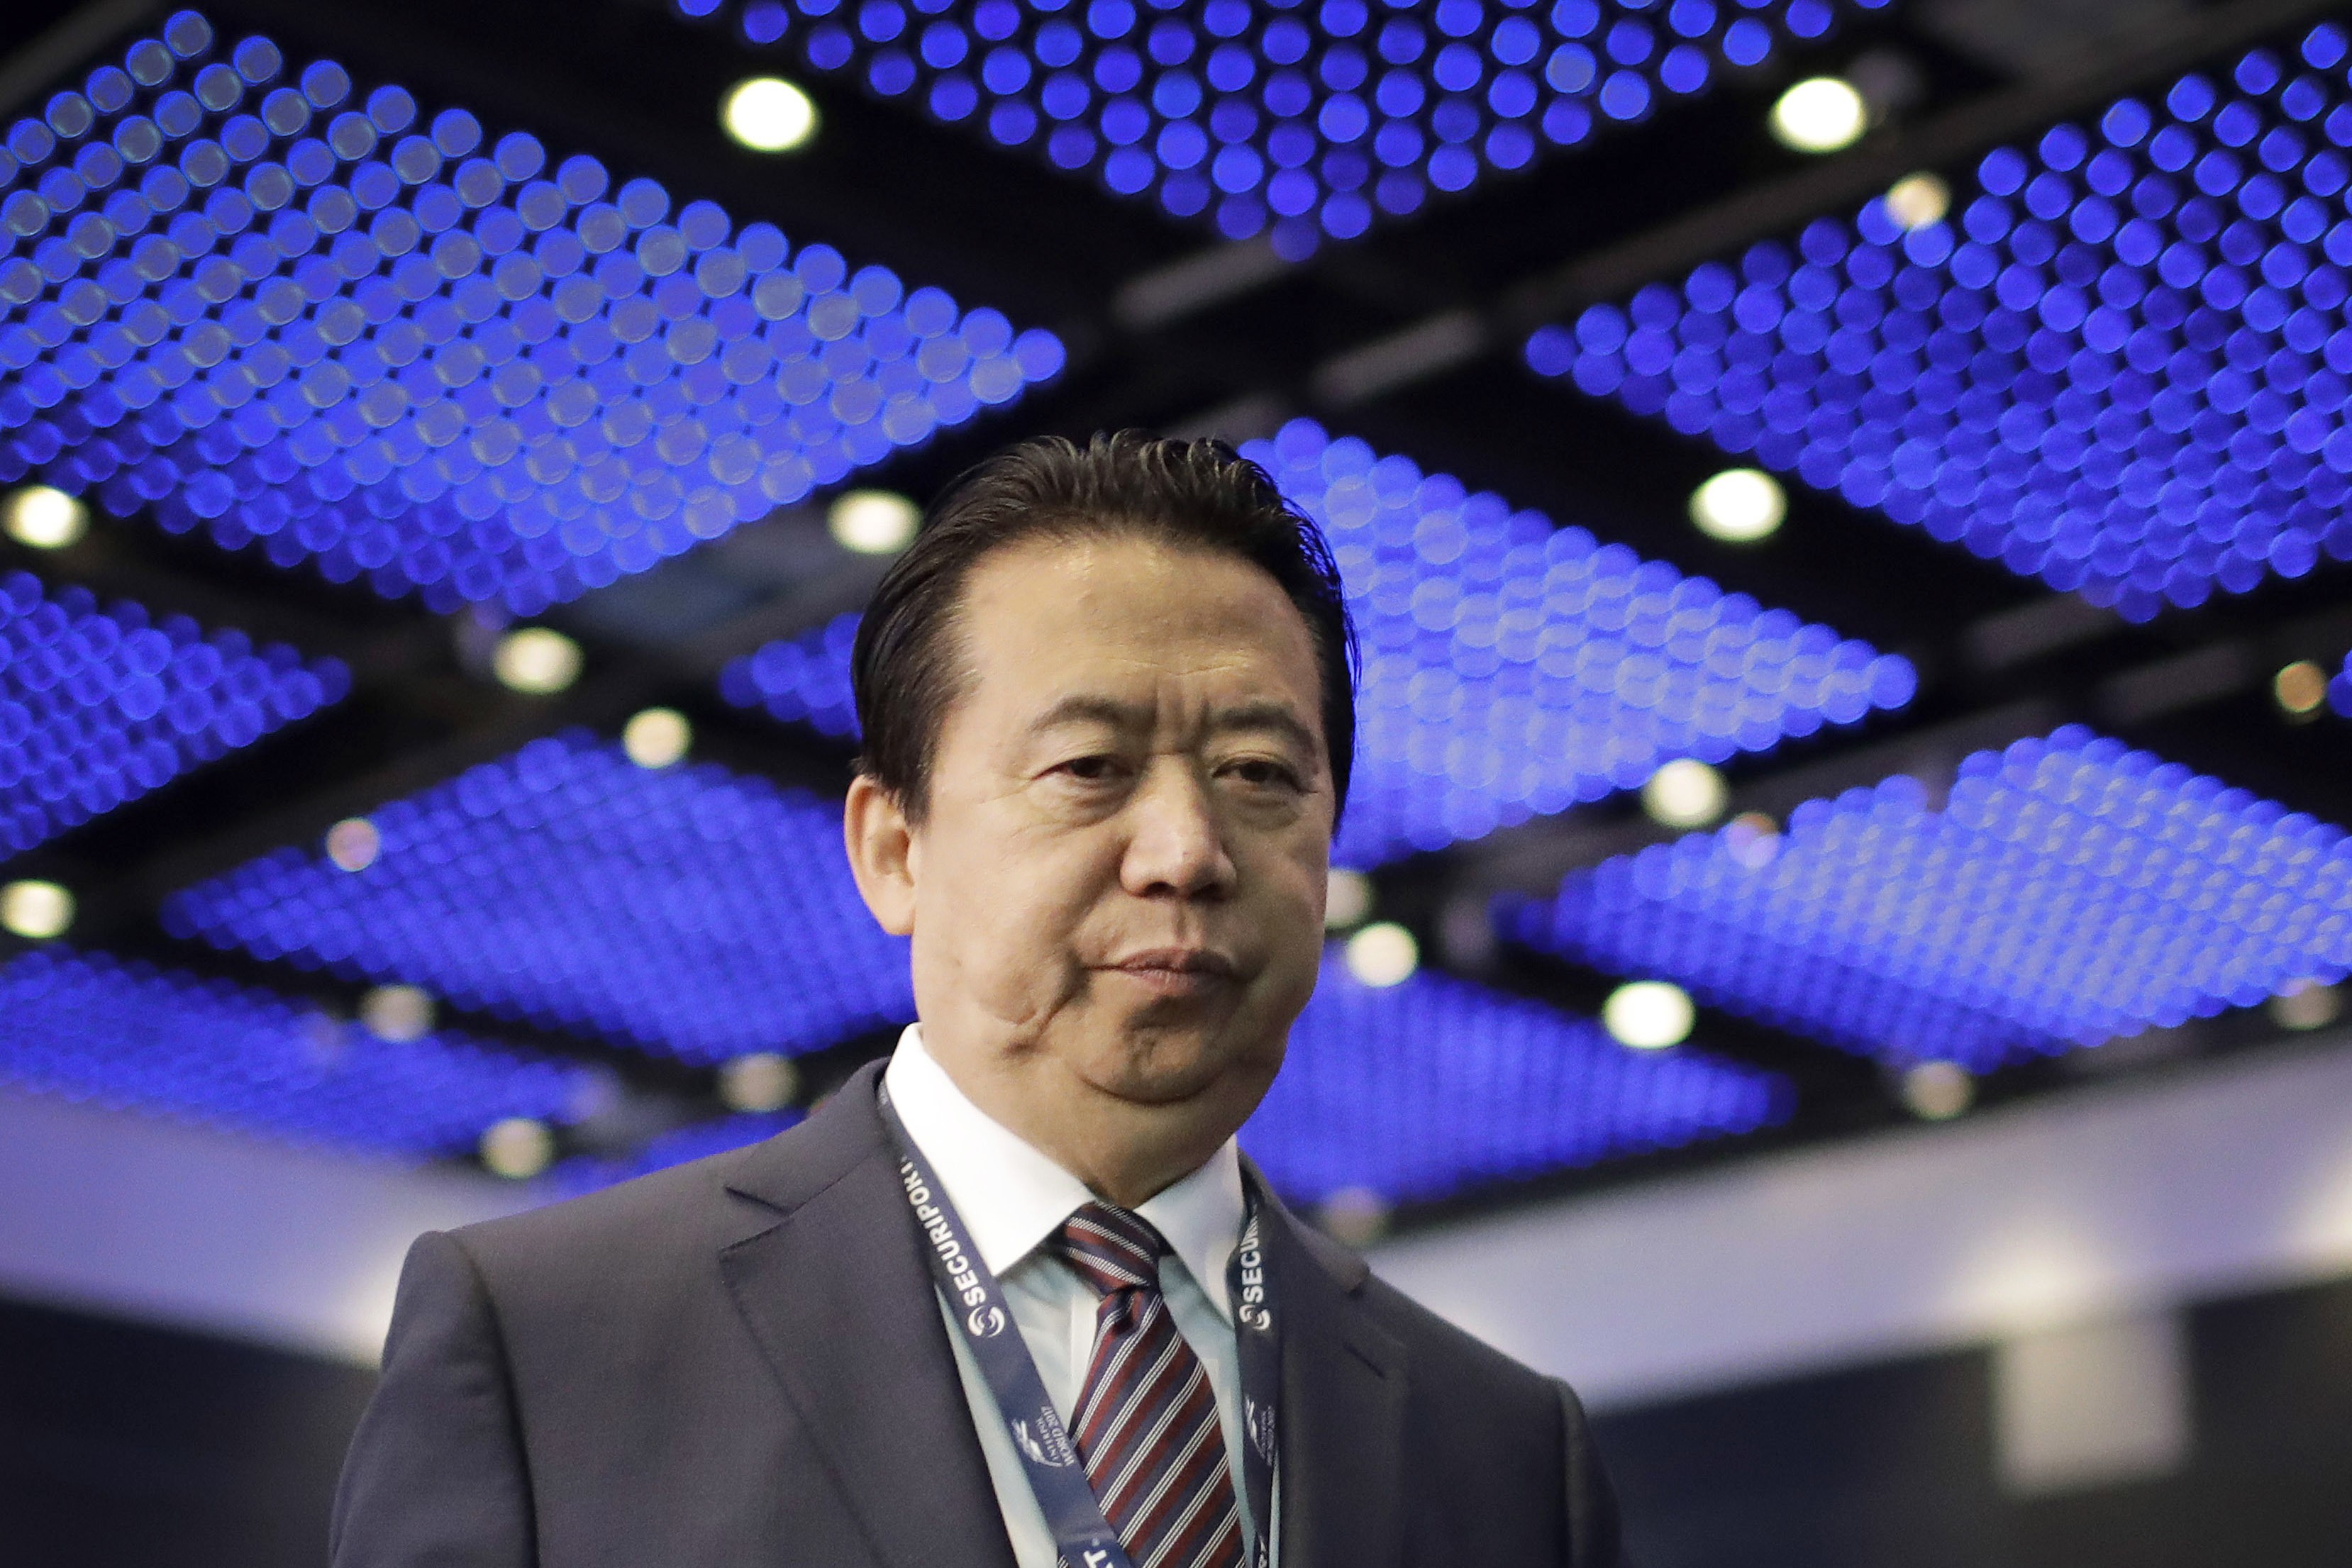 In this July 4, 2017 file photo, then Interpol president Meng Hongwei walks on stage to deliver his opening address at the Interpol World Congress in Singapore. Photo: AP